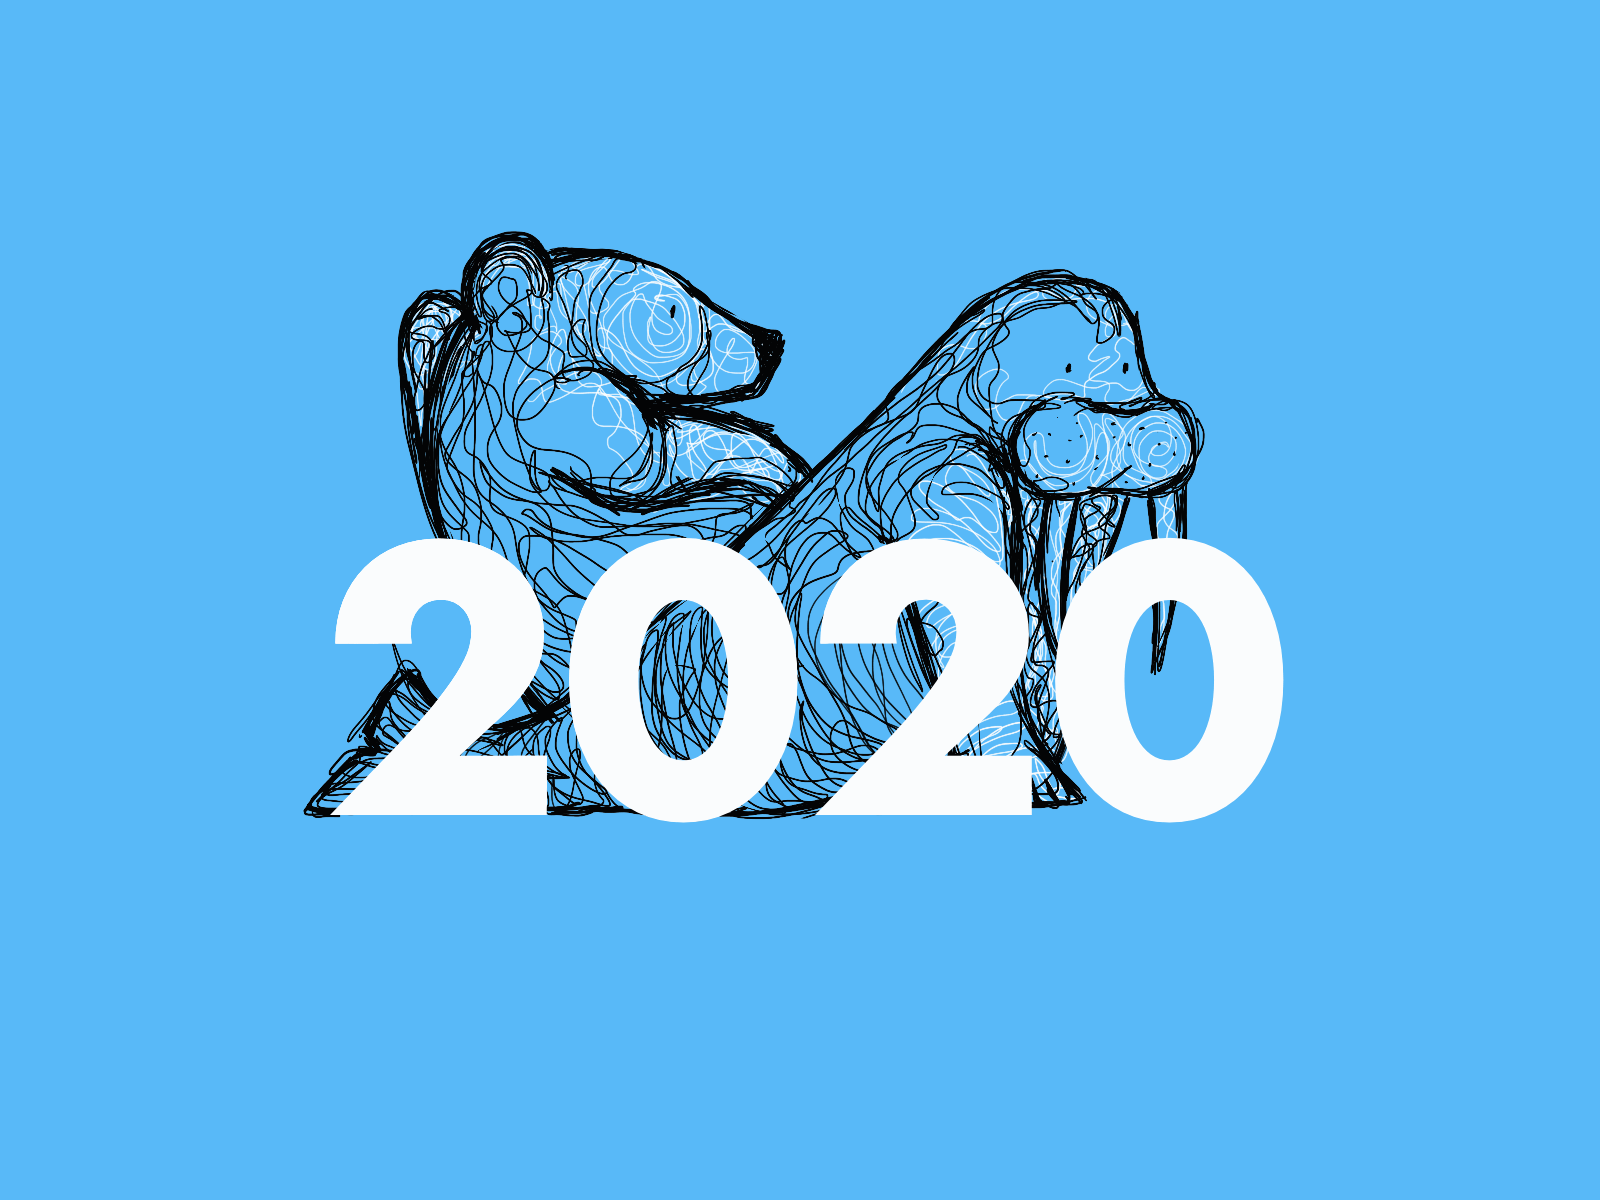 What a warm winter - 2020 serie 2020 animals background blue frame by frame gif animated illustration procreate